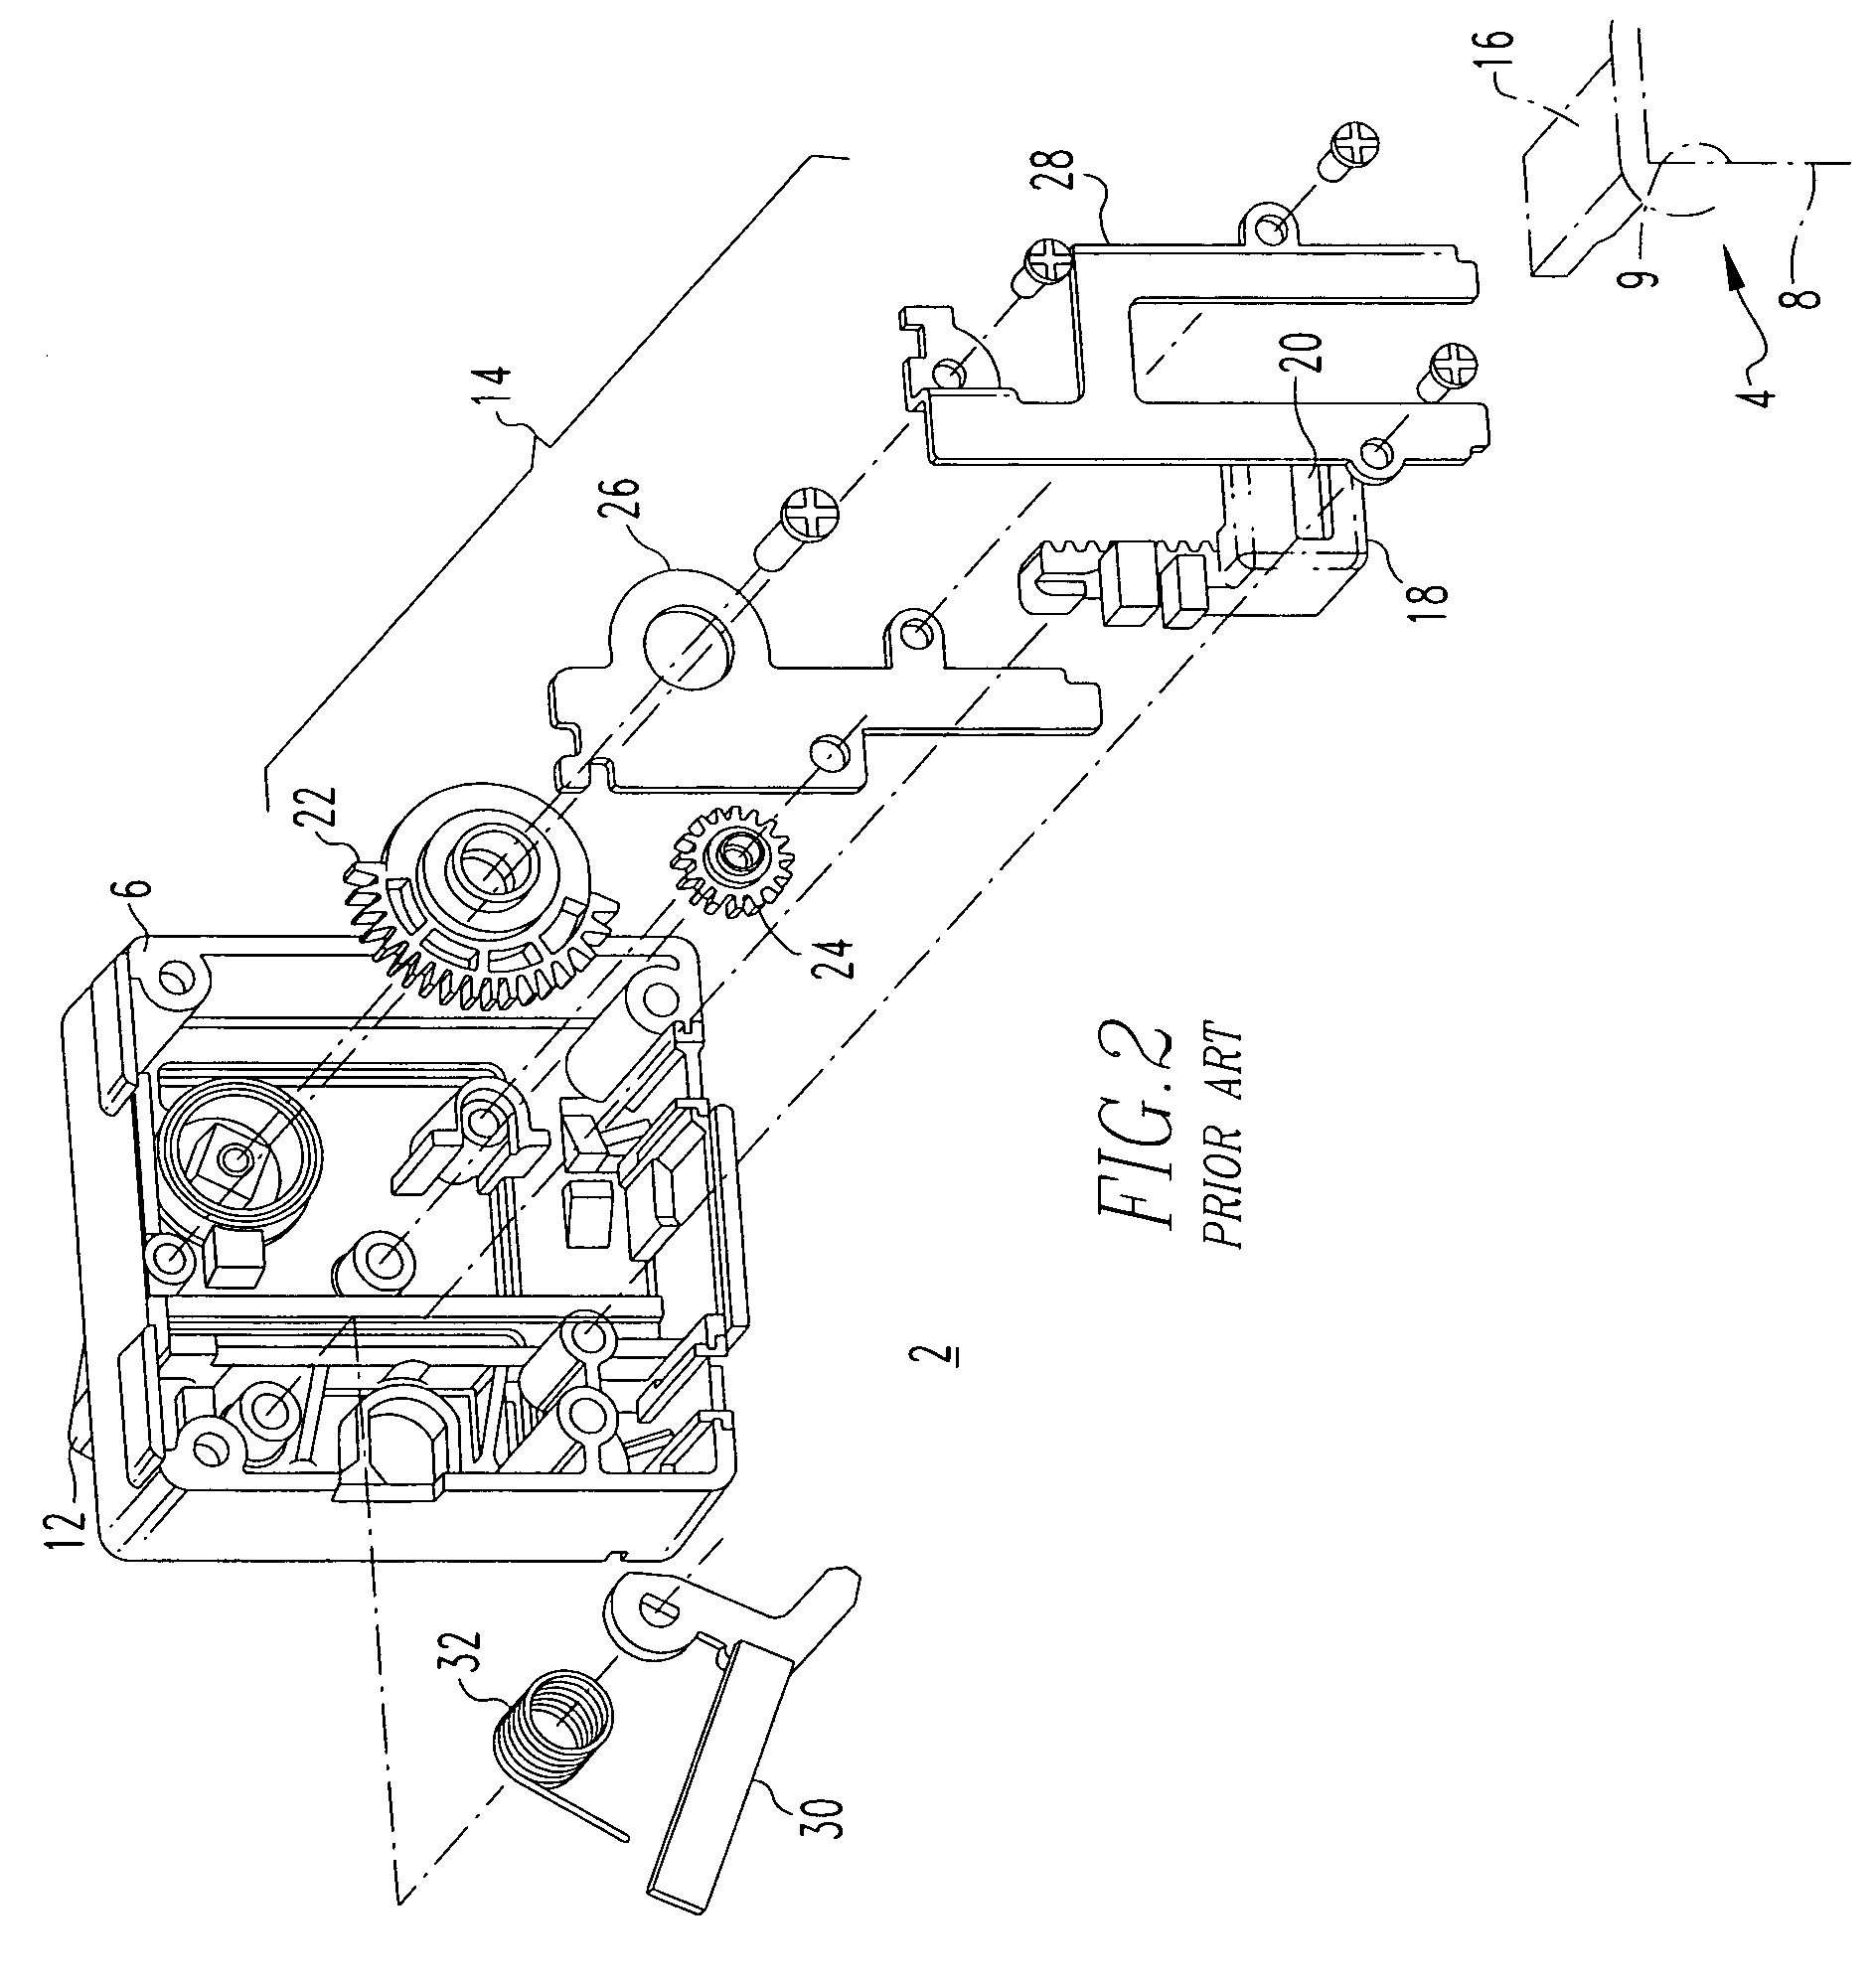 Handle attachment, assist mechanism therefor, and electrical switching apparatus employing the same